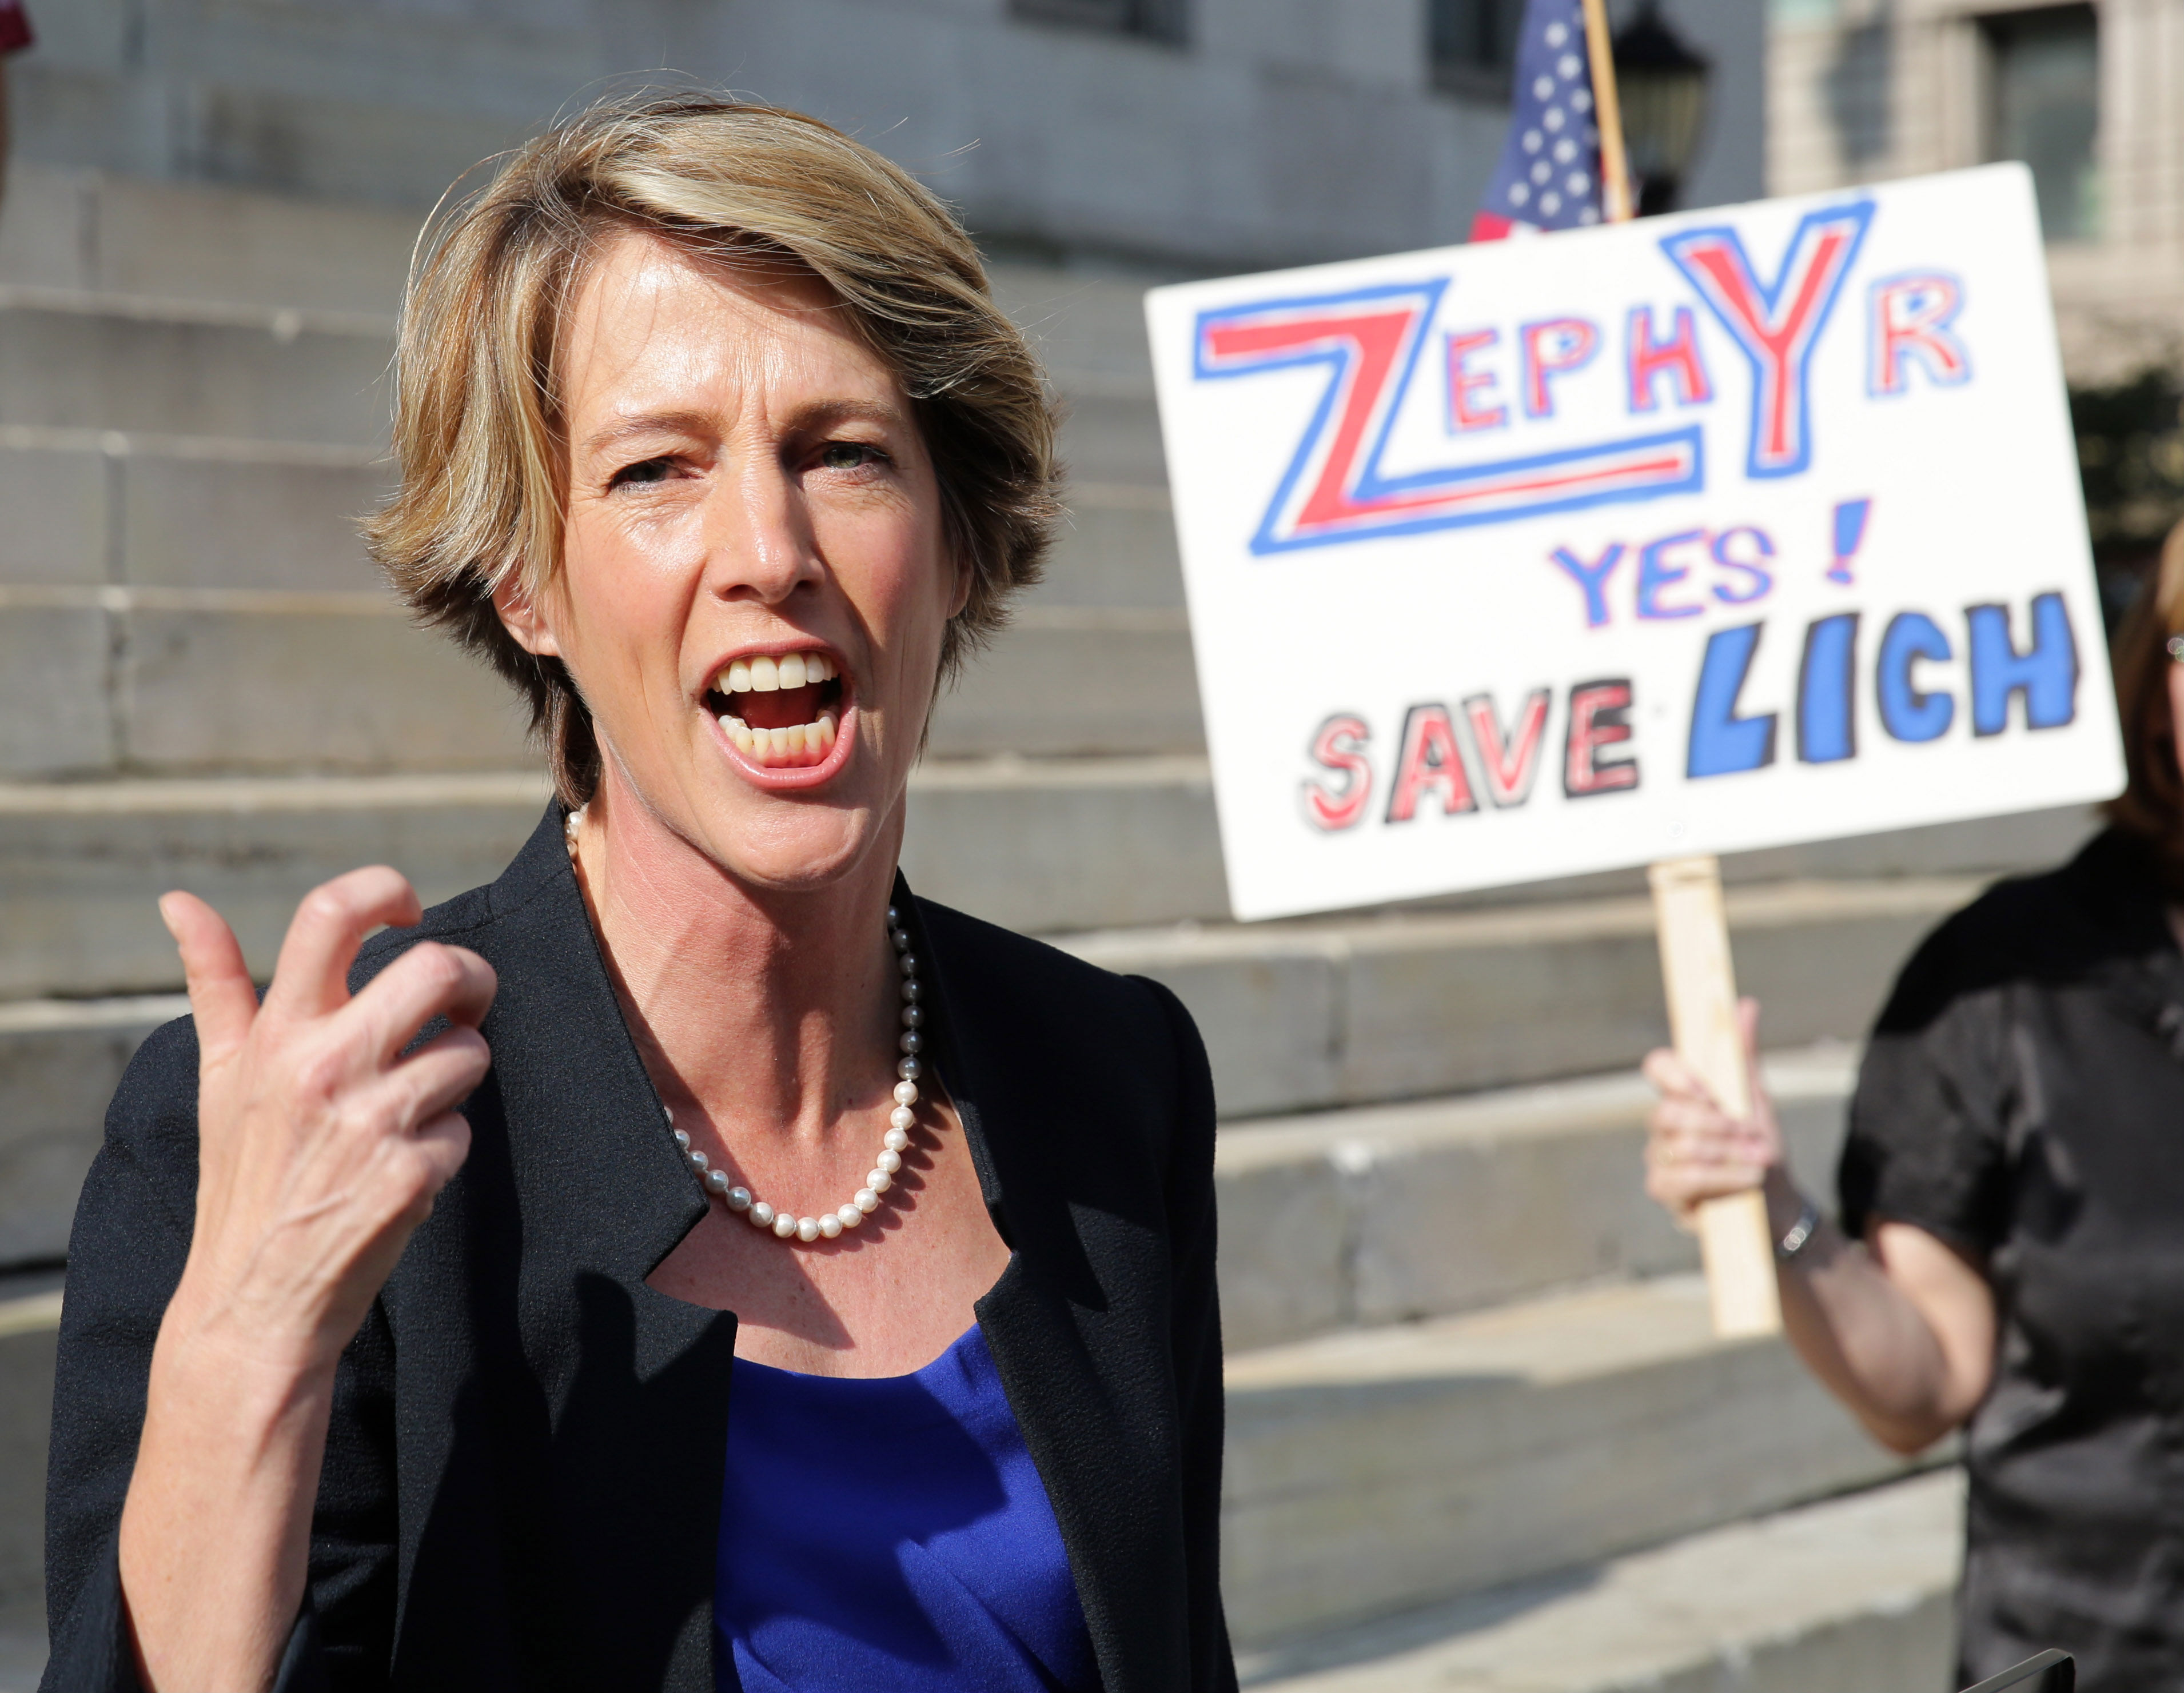 Zephyr Teachout for Governor of New York